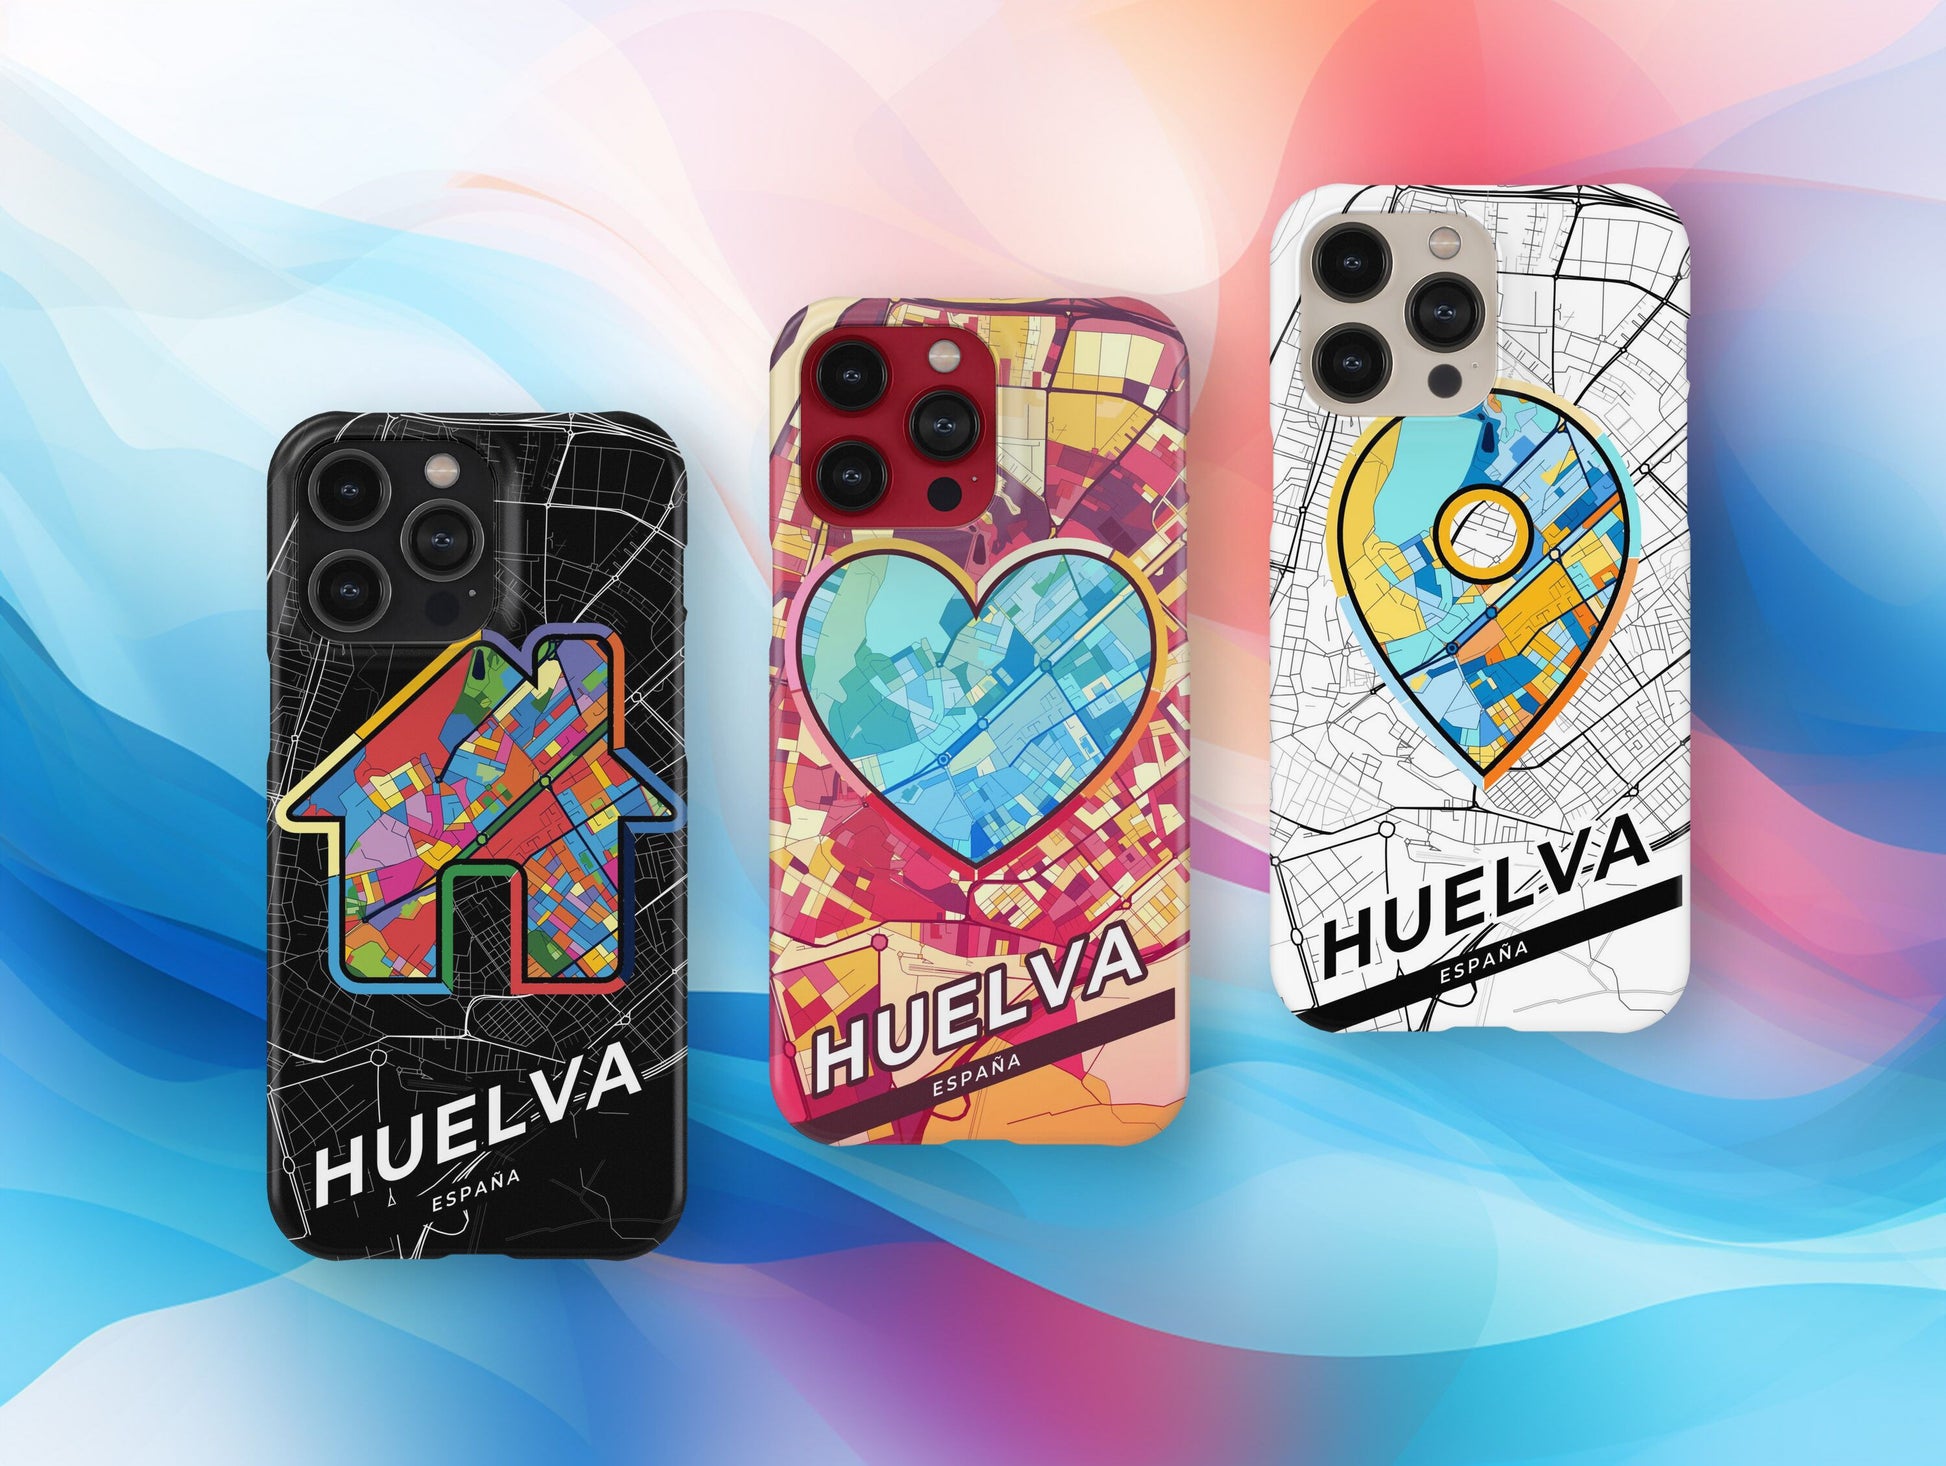 Huelva Spain slim phone case with colorful icon. Birthday, wedding or housewarming gift. Couple match cases.